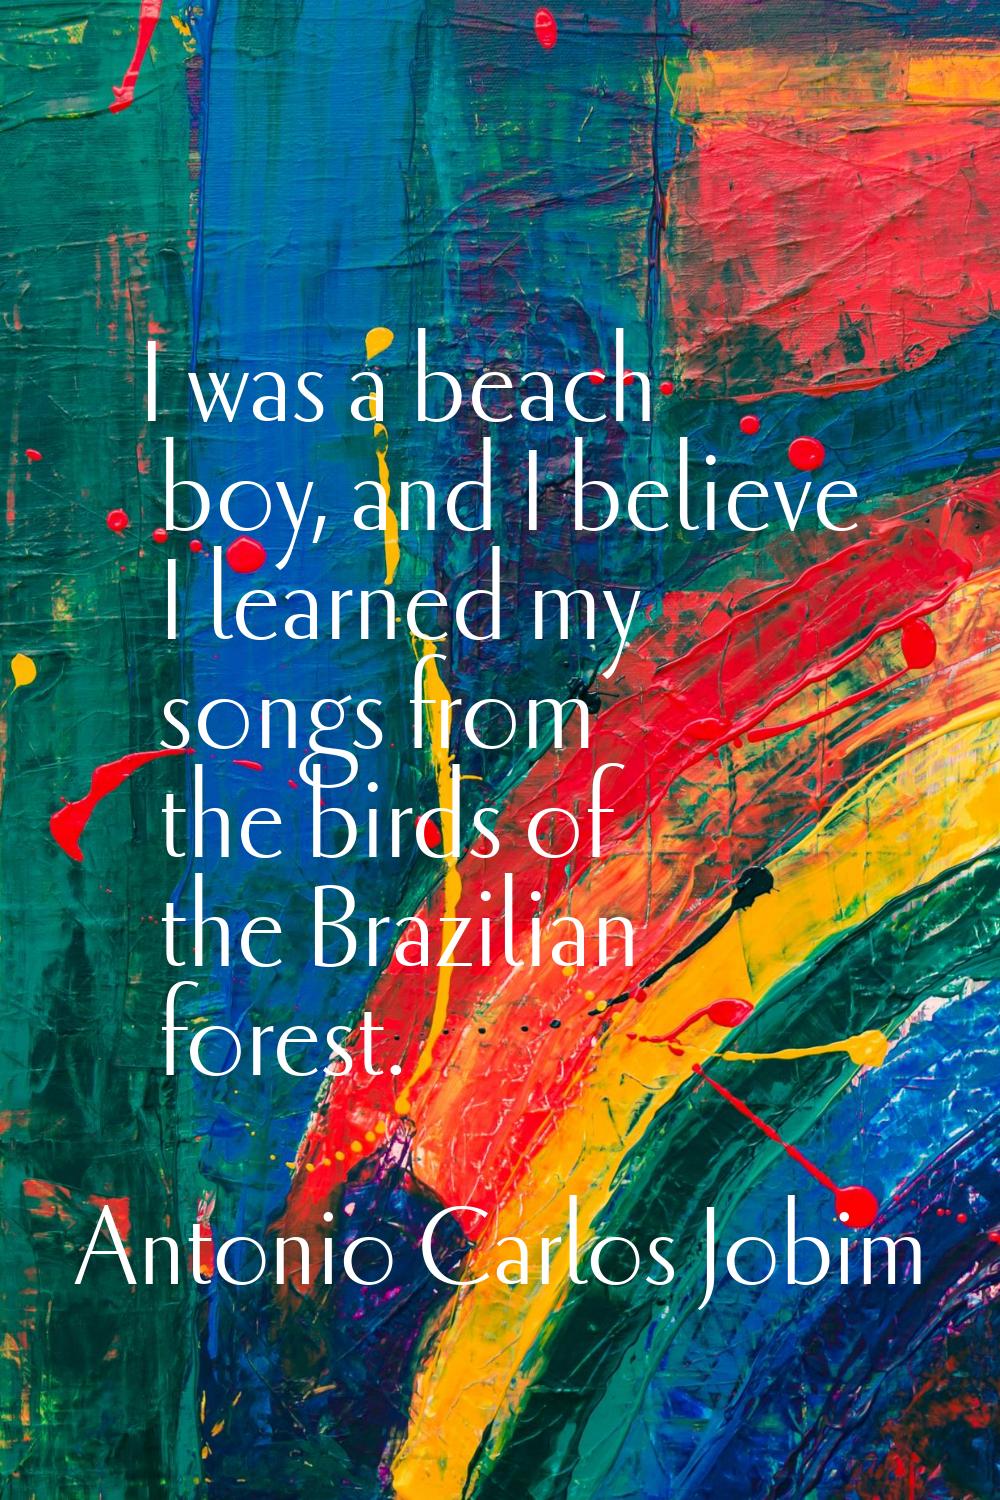 I was a beach boy, and I believe I learned my songs from the birds of the Brazilian forest.